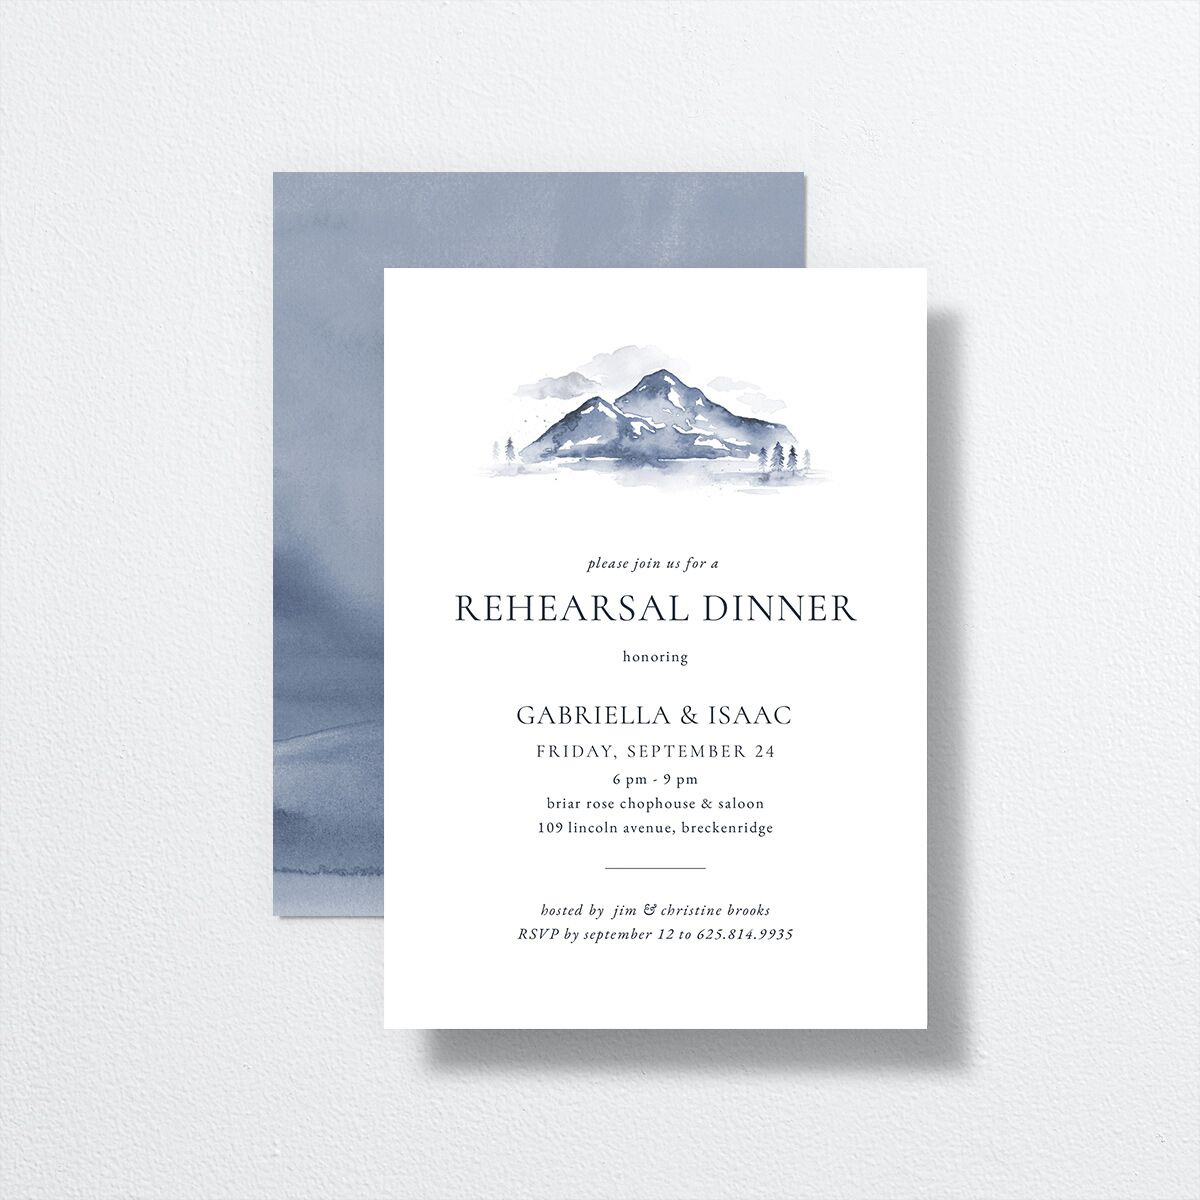 Watercolor Mountains Rehearsal Dinner Invitations front-and-back in blue